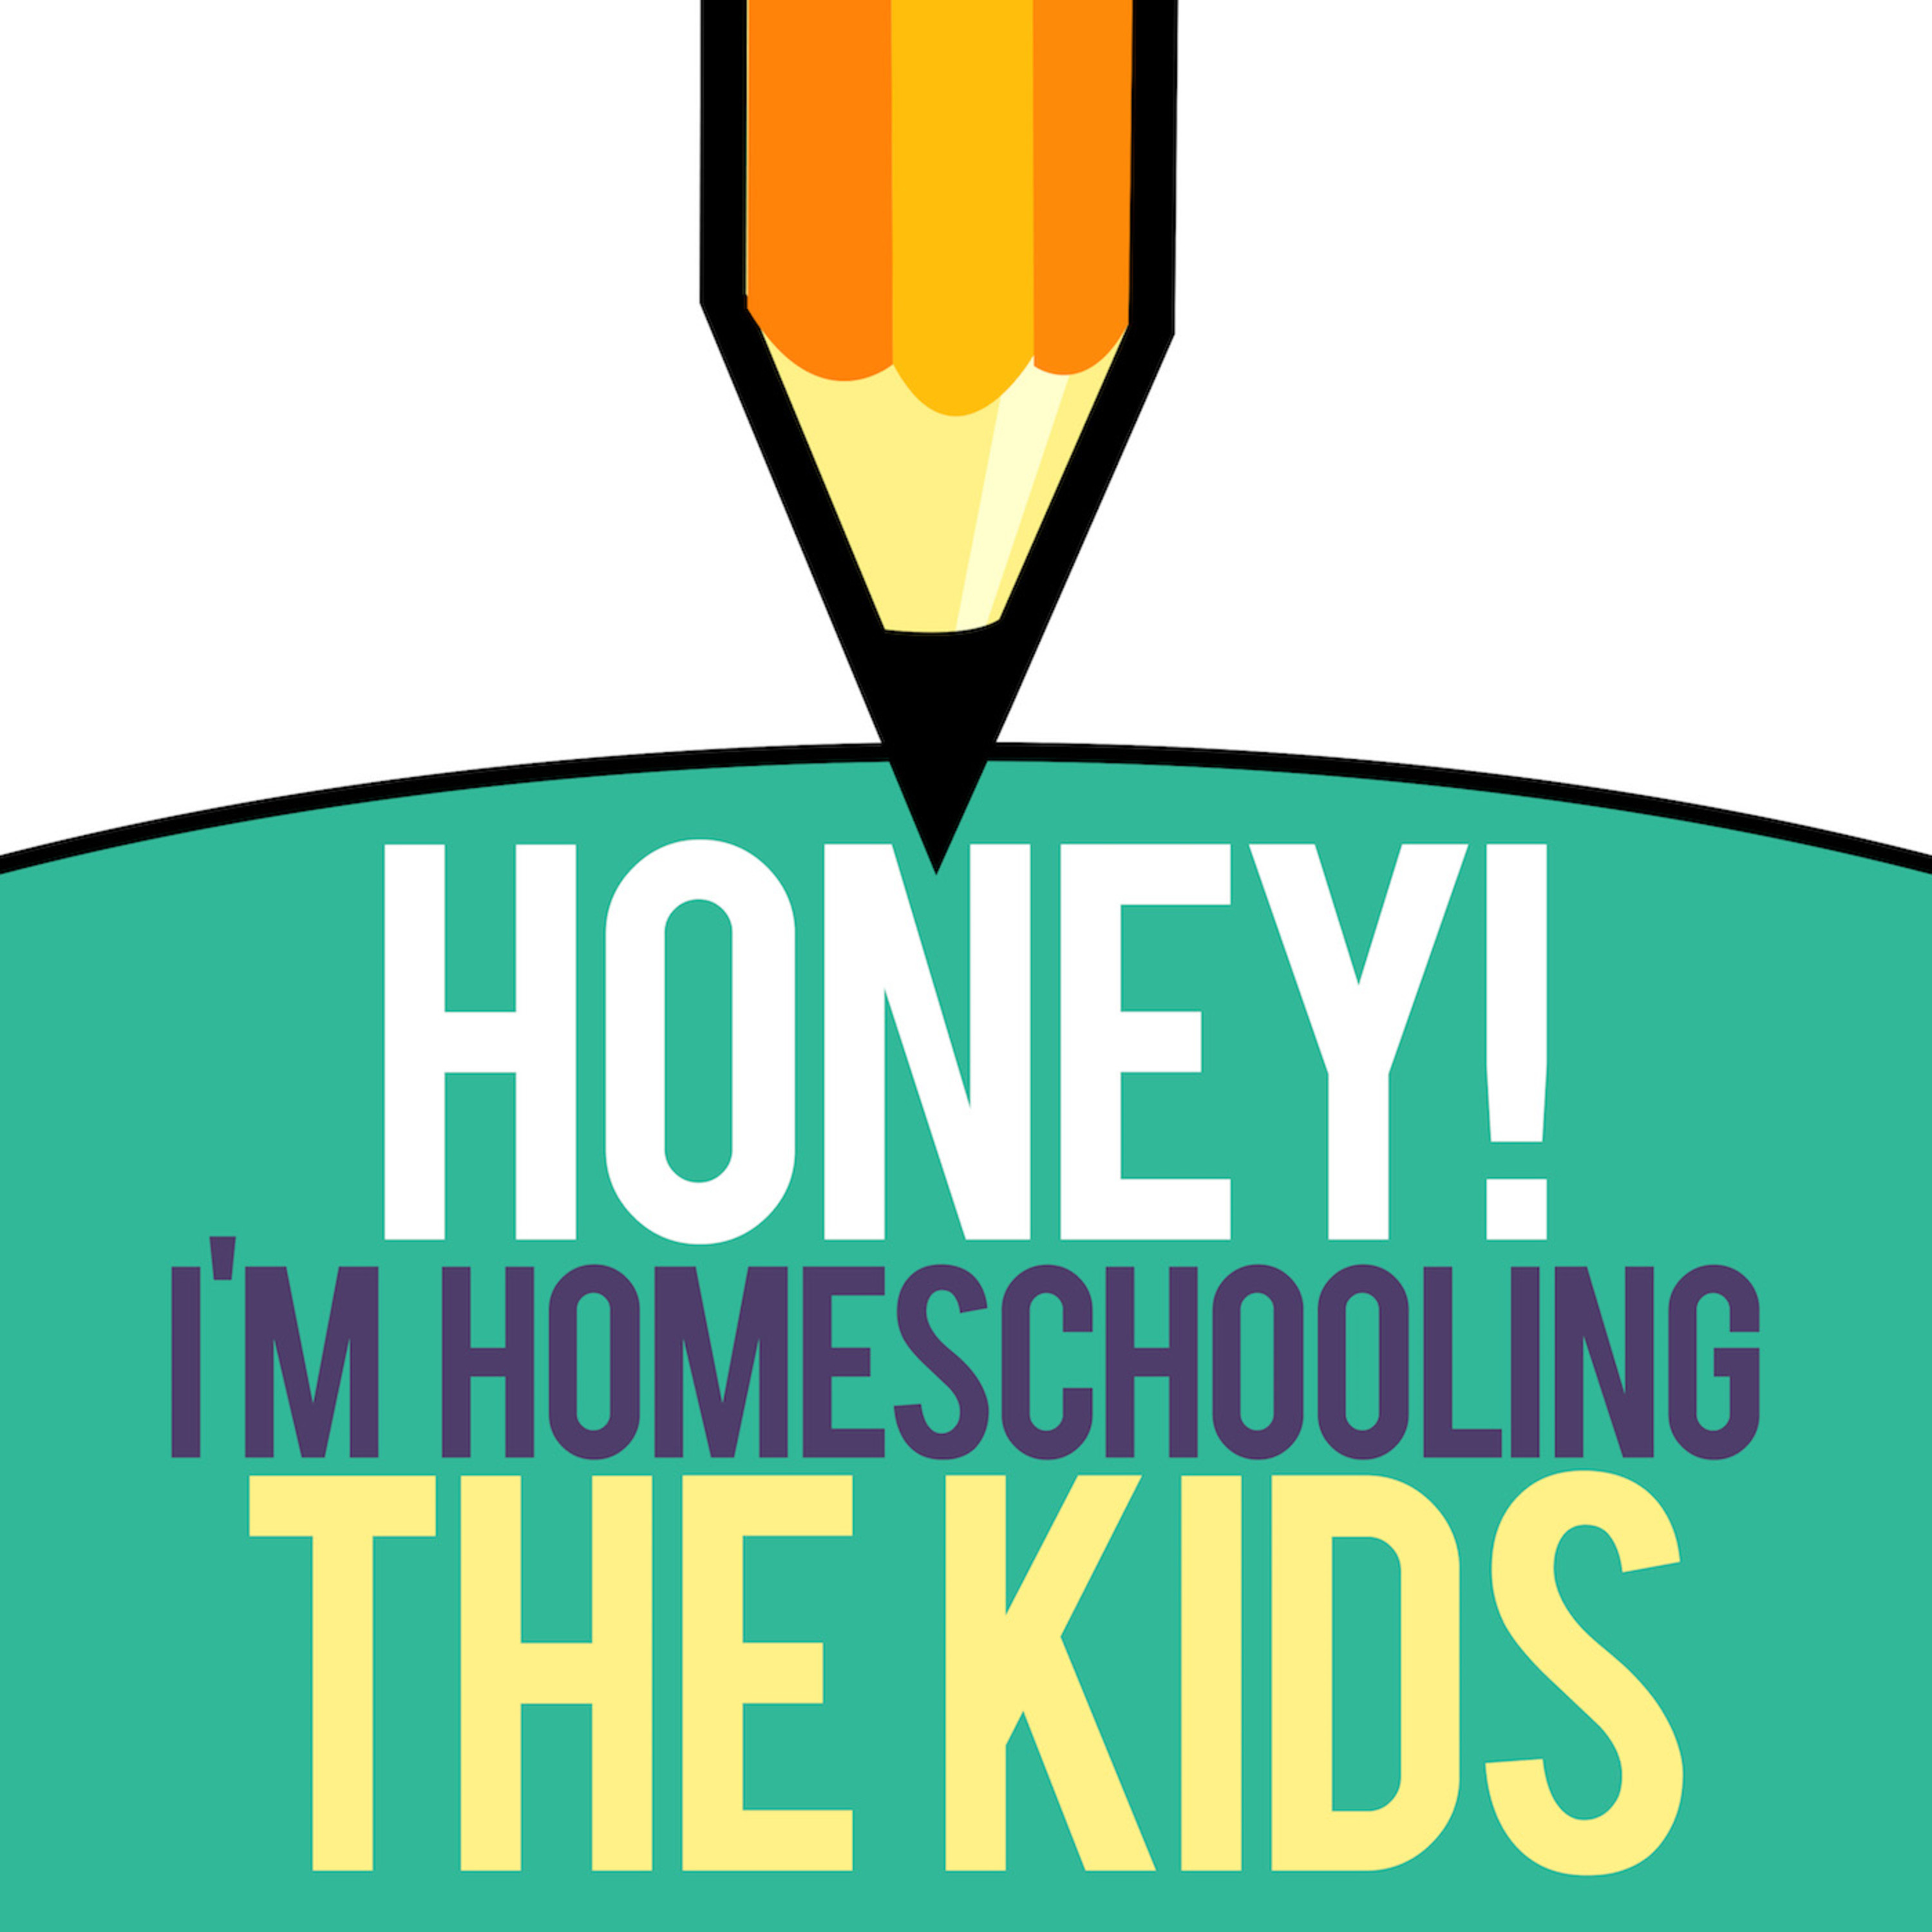 Build Your Community~How To Be An Awesome Homeschooler